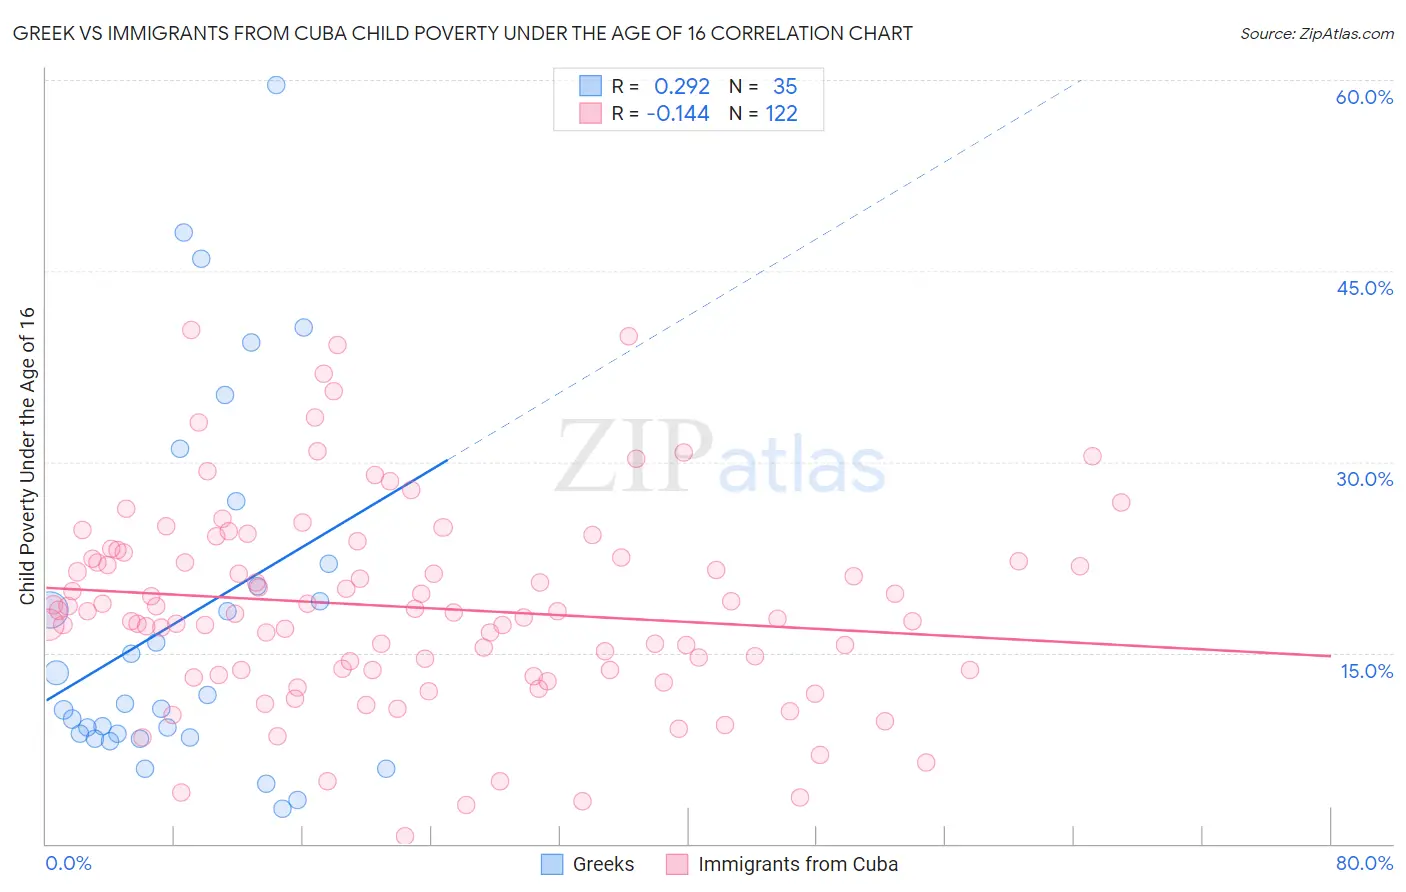 Greek vs Immigrants from Cuba Child Poverty Under the Age of 16